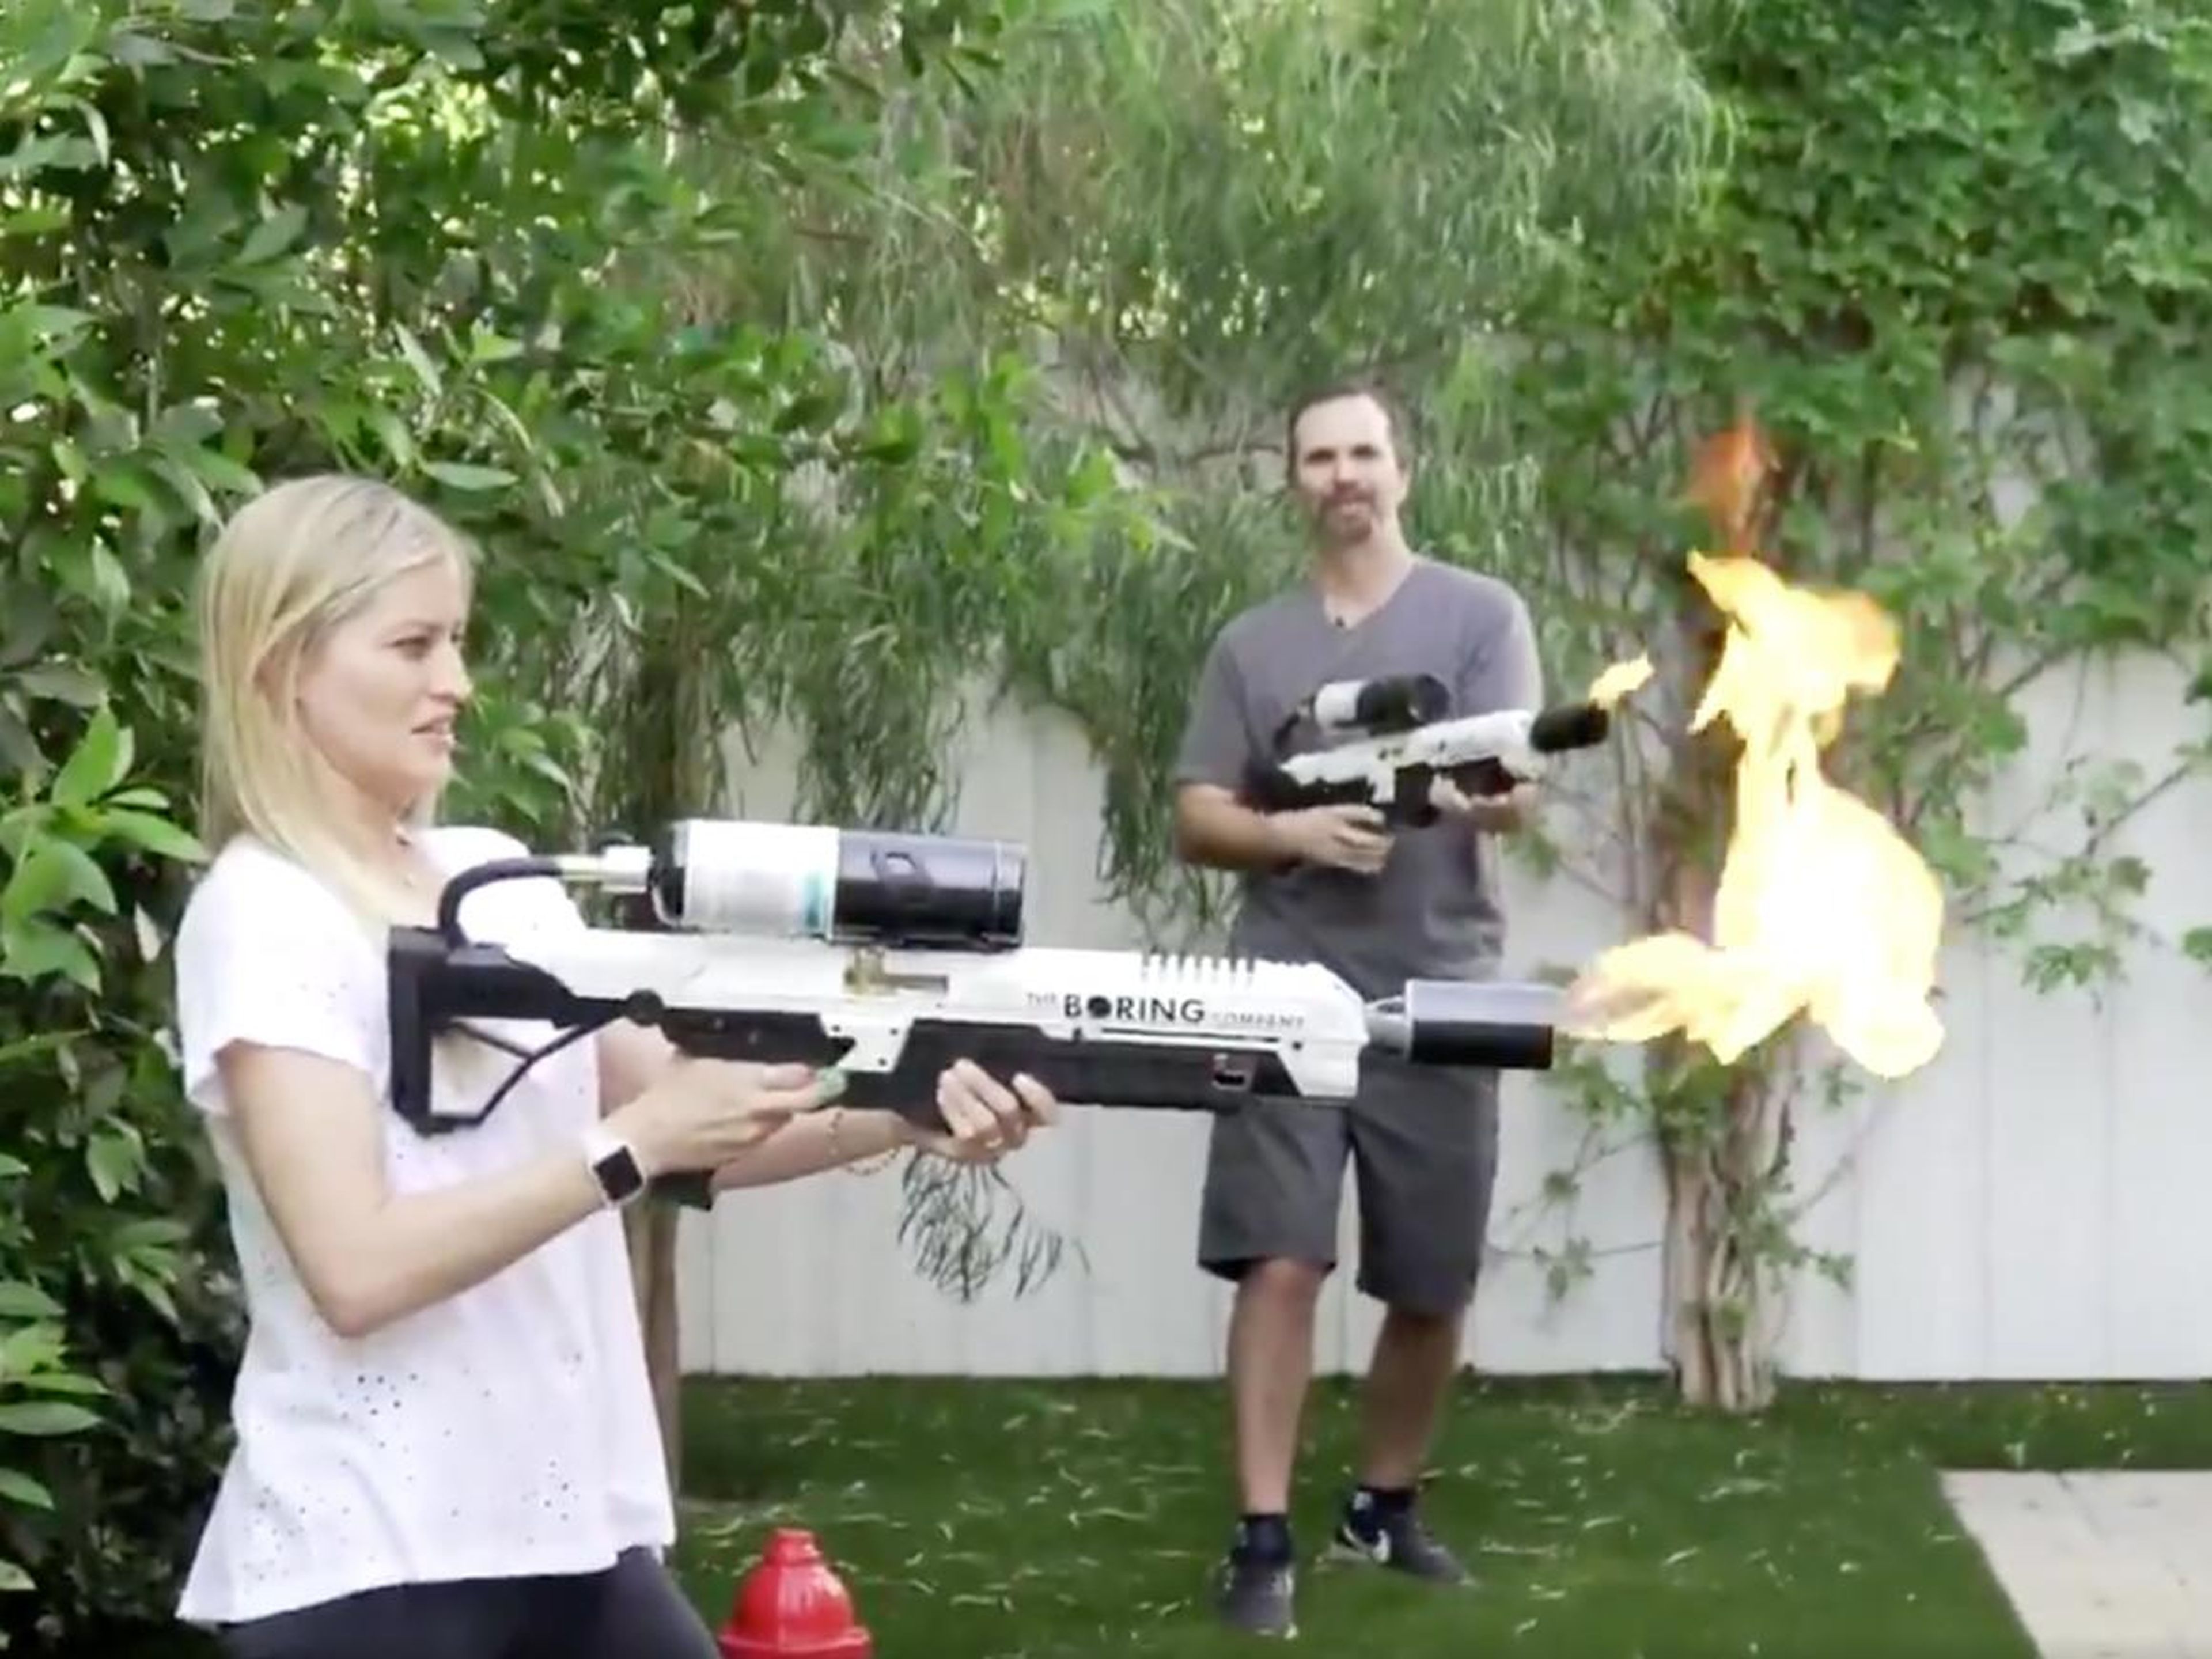 One branded product Tesla hasn't offered its fans is a flamethrower.